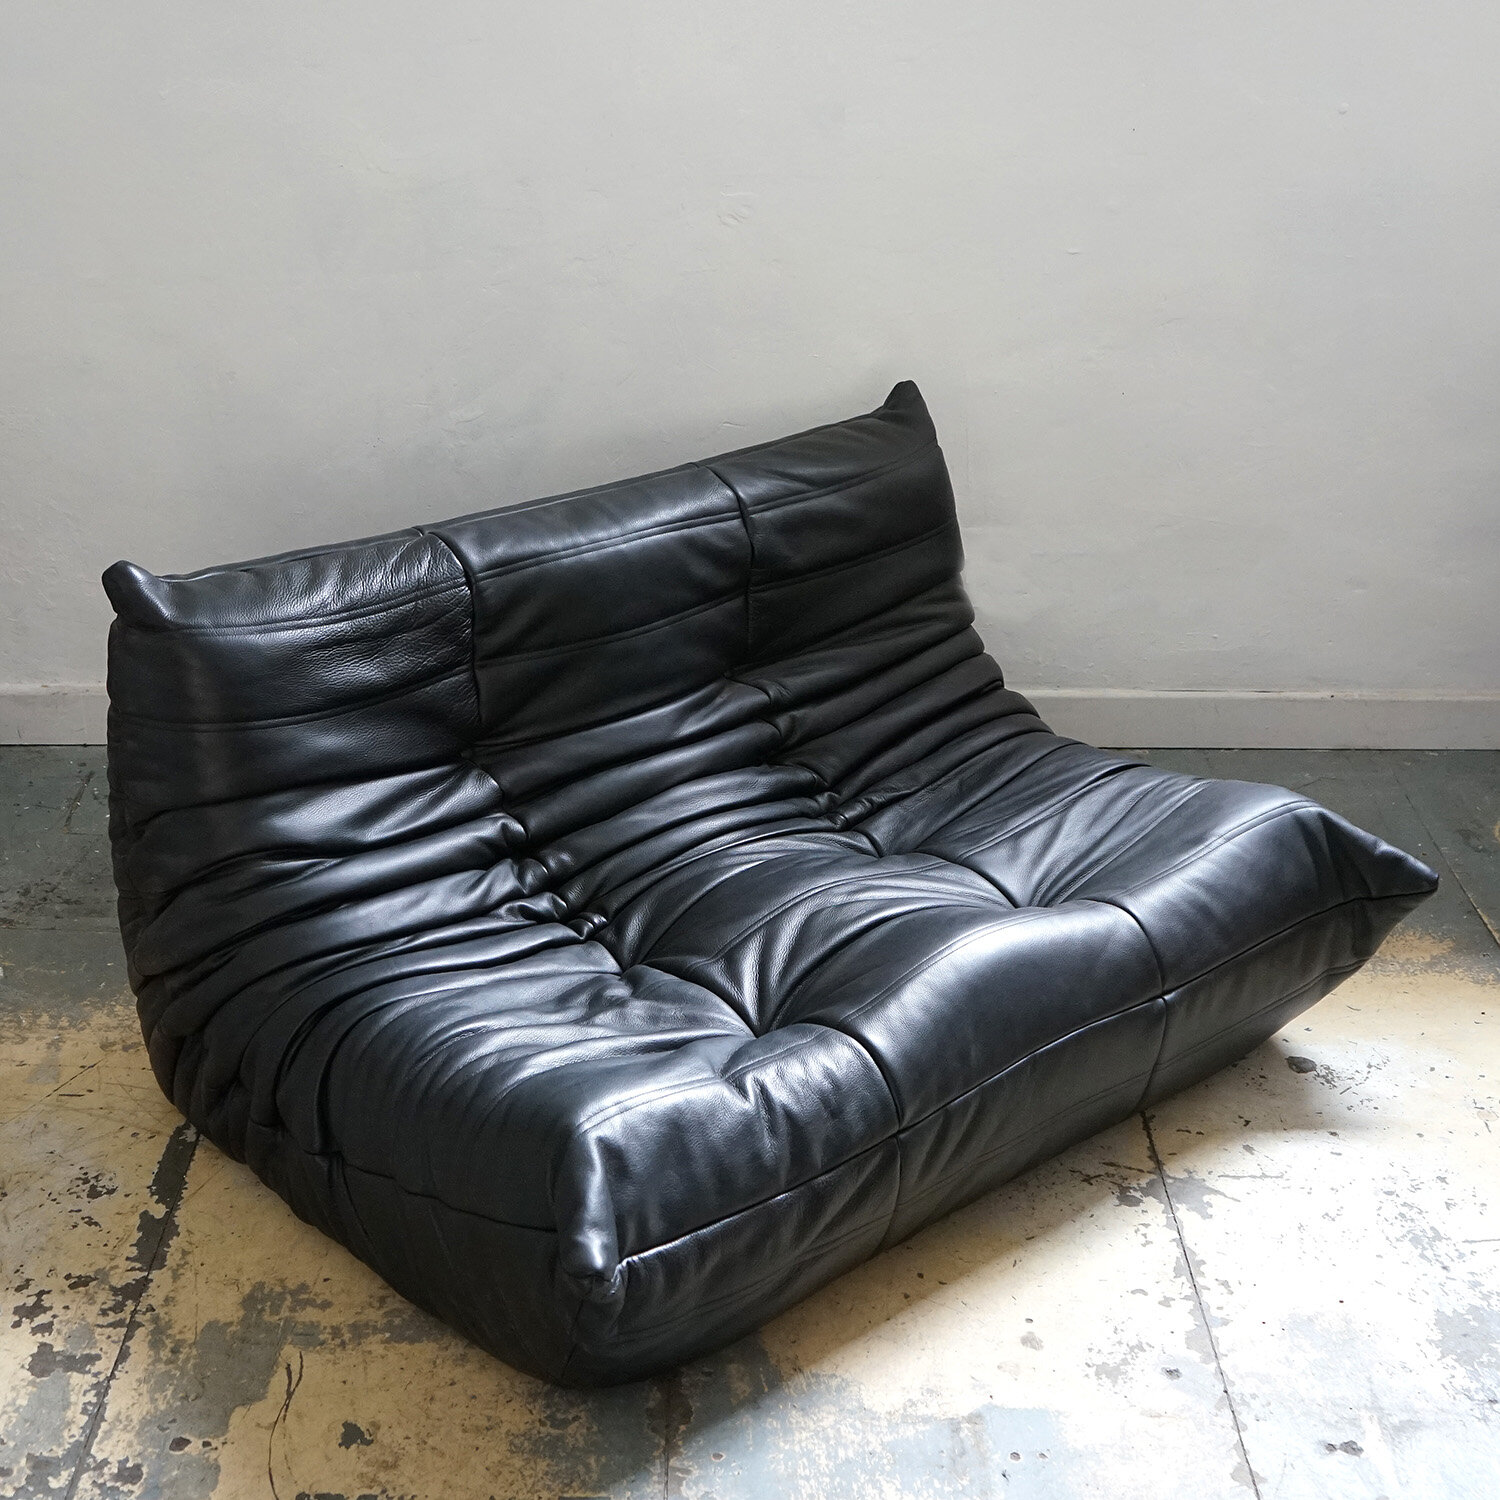 2 Seater Togo Sofa In Black Leather By Michel Ducaroy For Ligne Roset Vintage And Antique Decorative Interiors